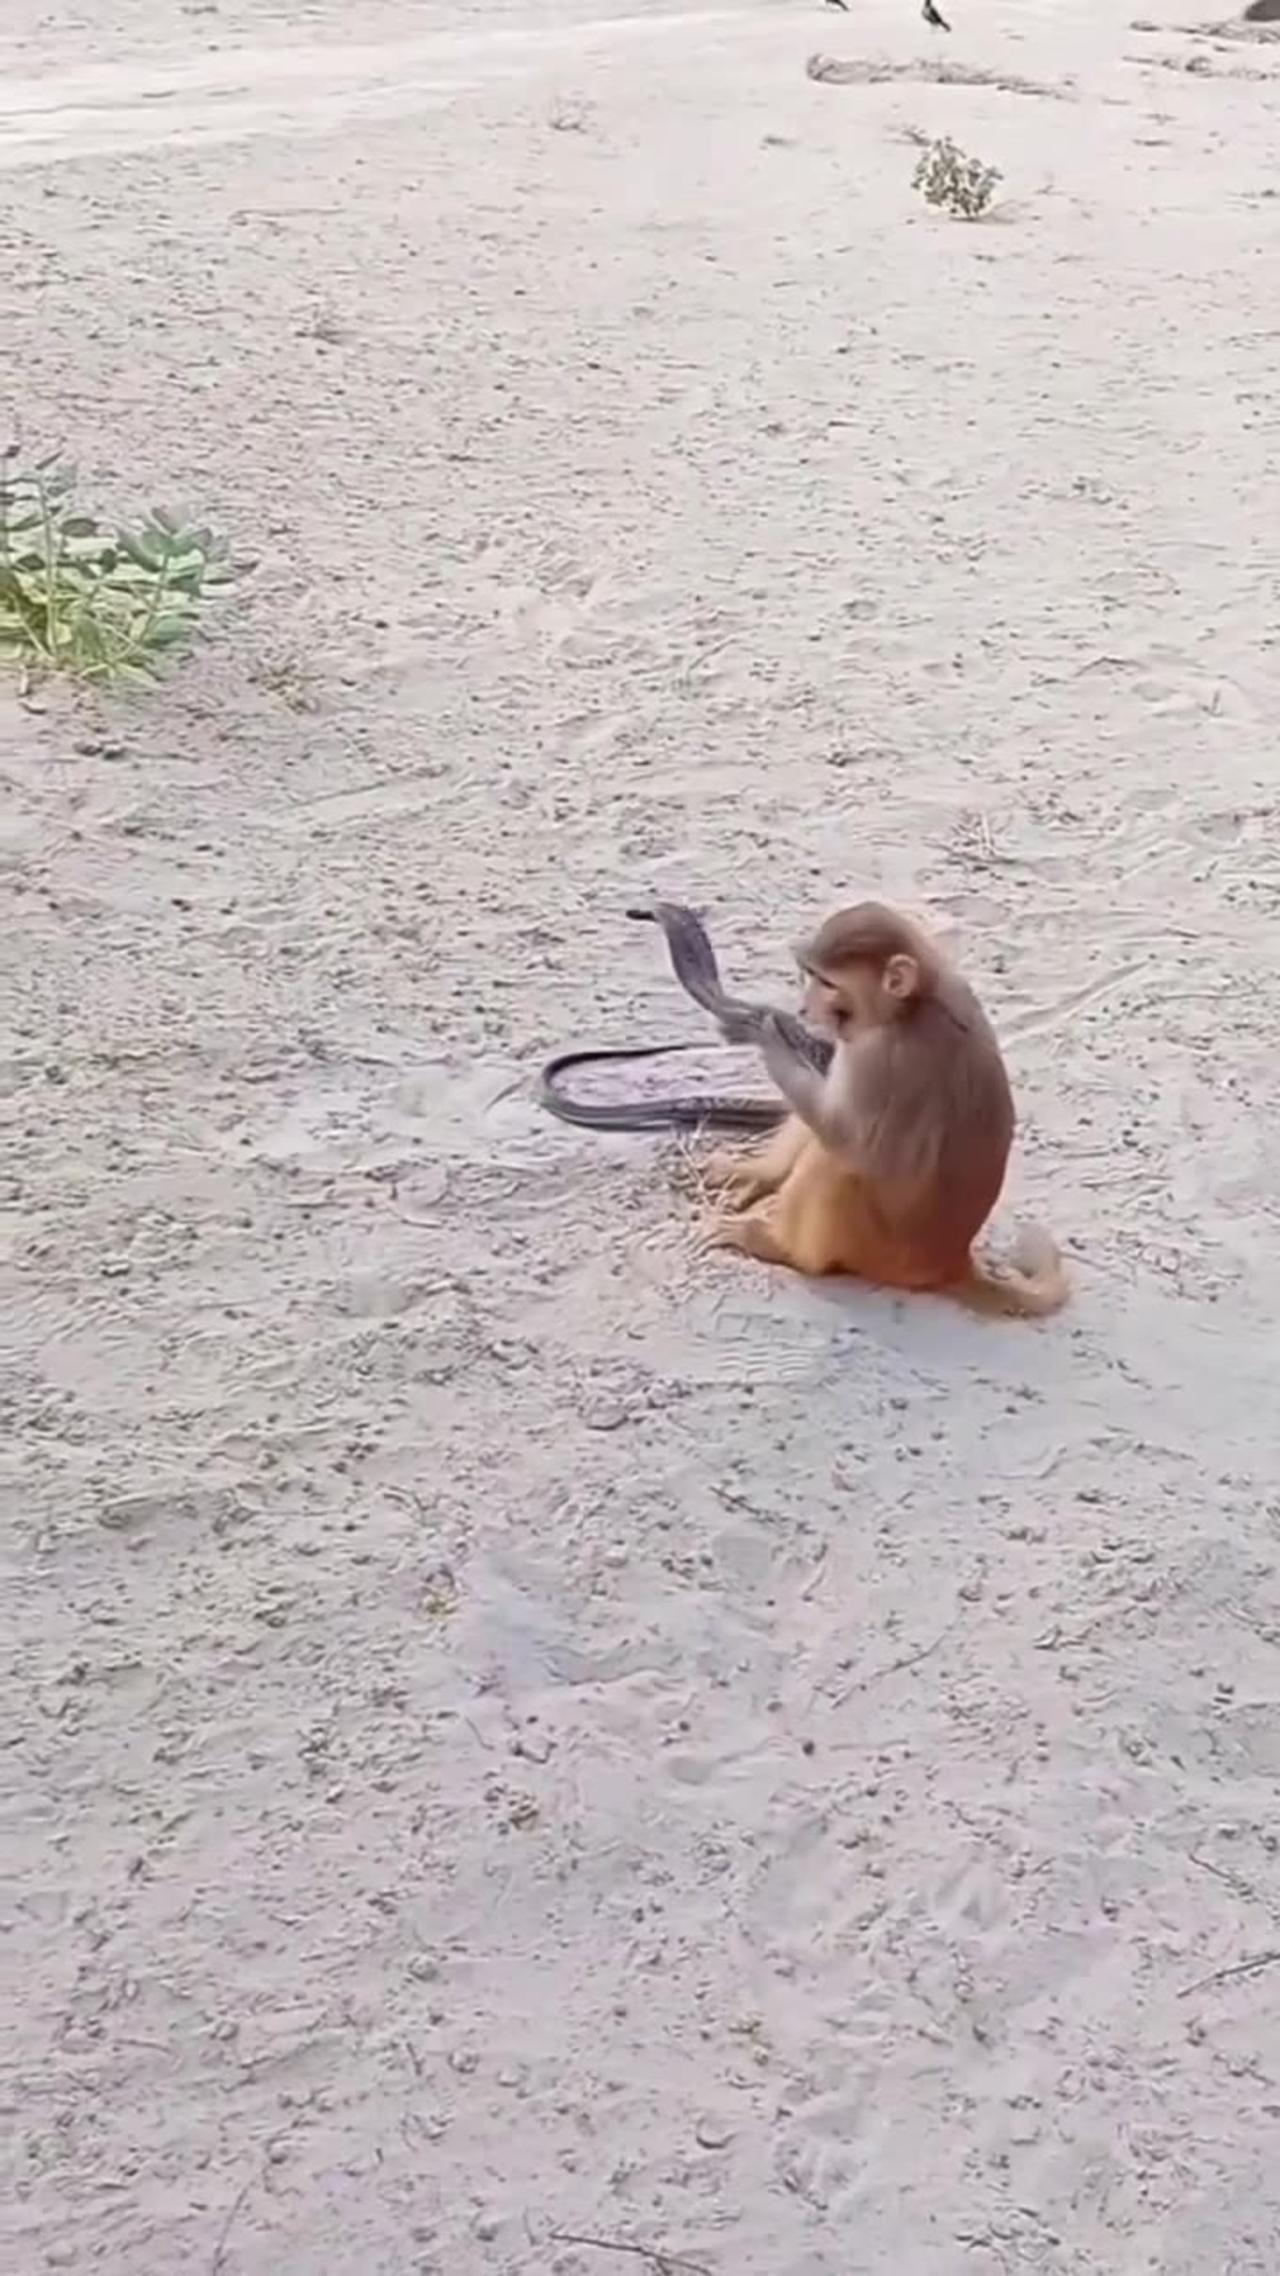 Funny moments video, funny animal videos funny cute,Funny monkey & snake fight 🤣